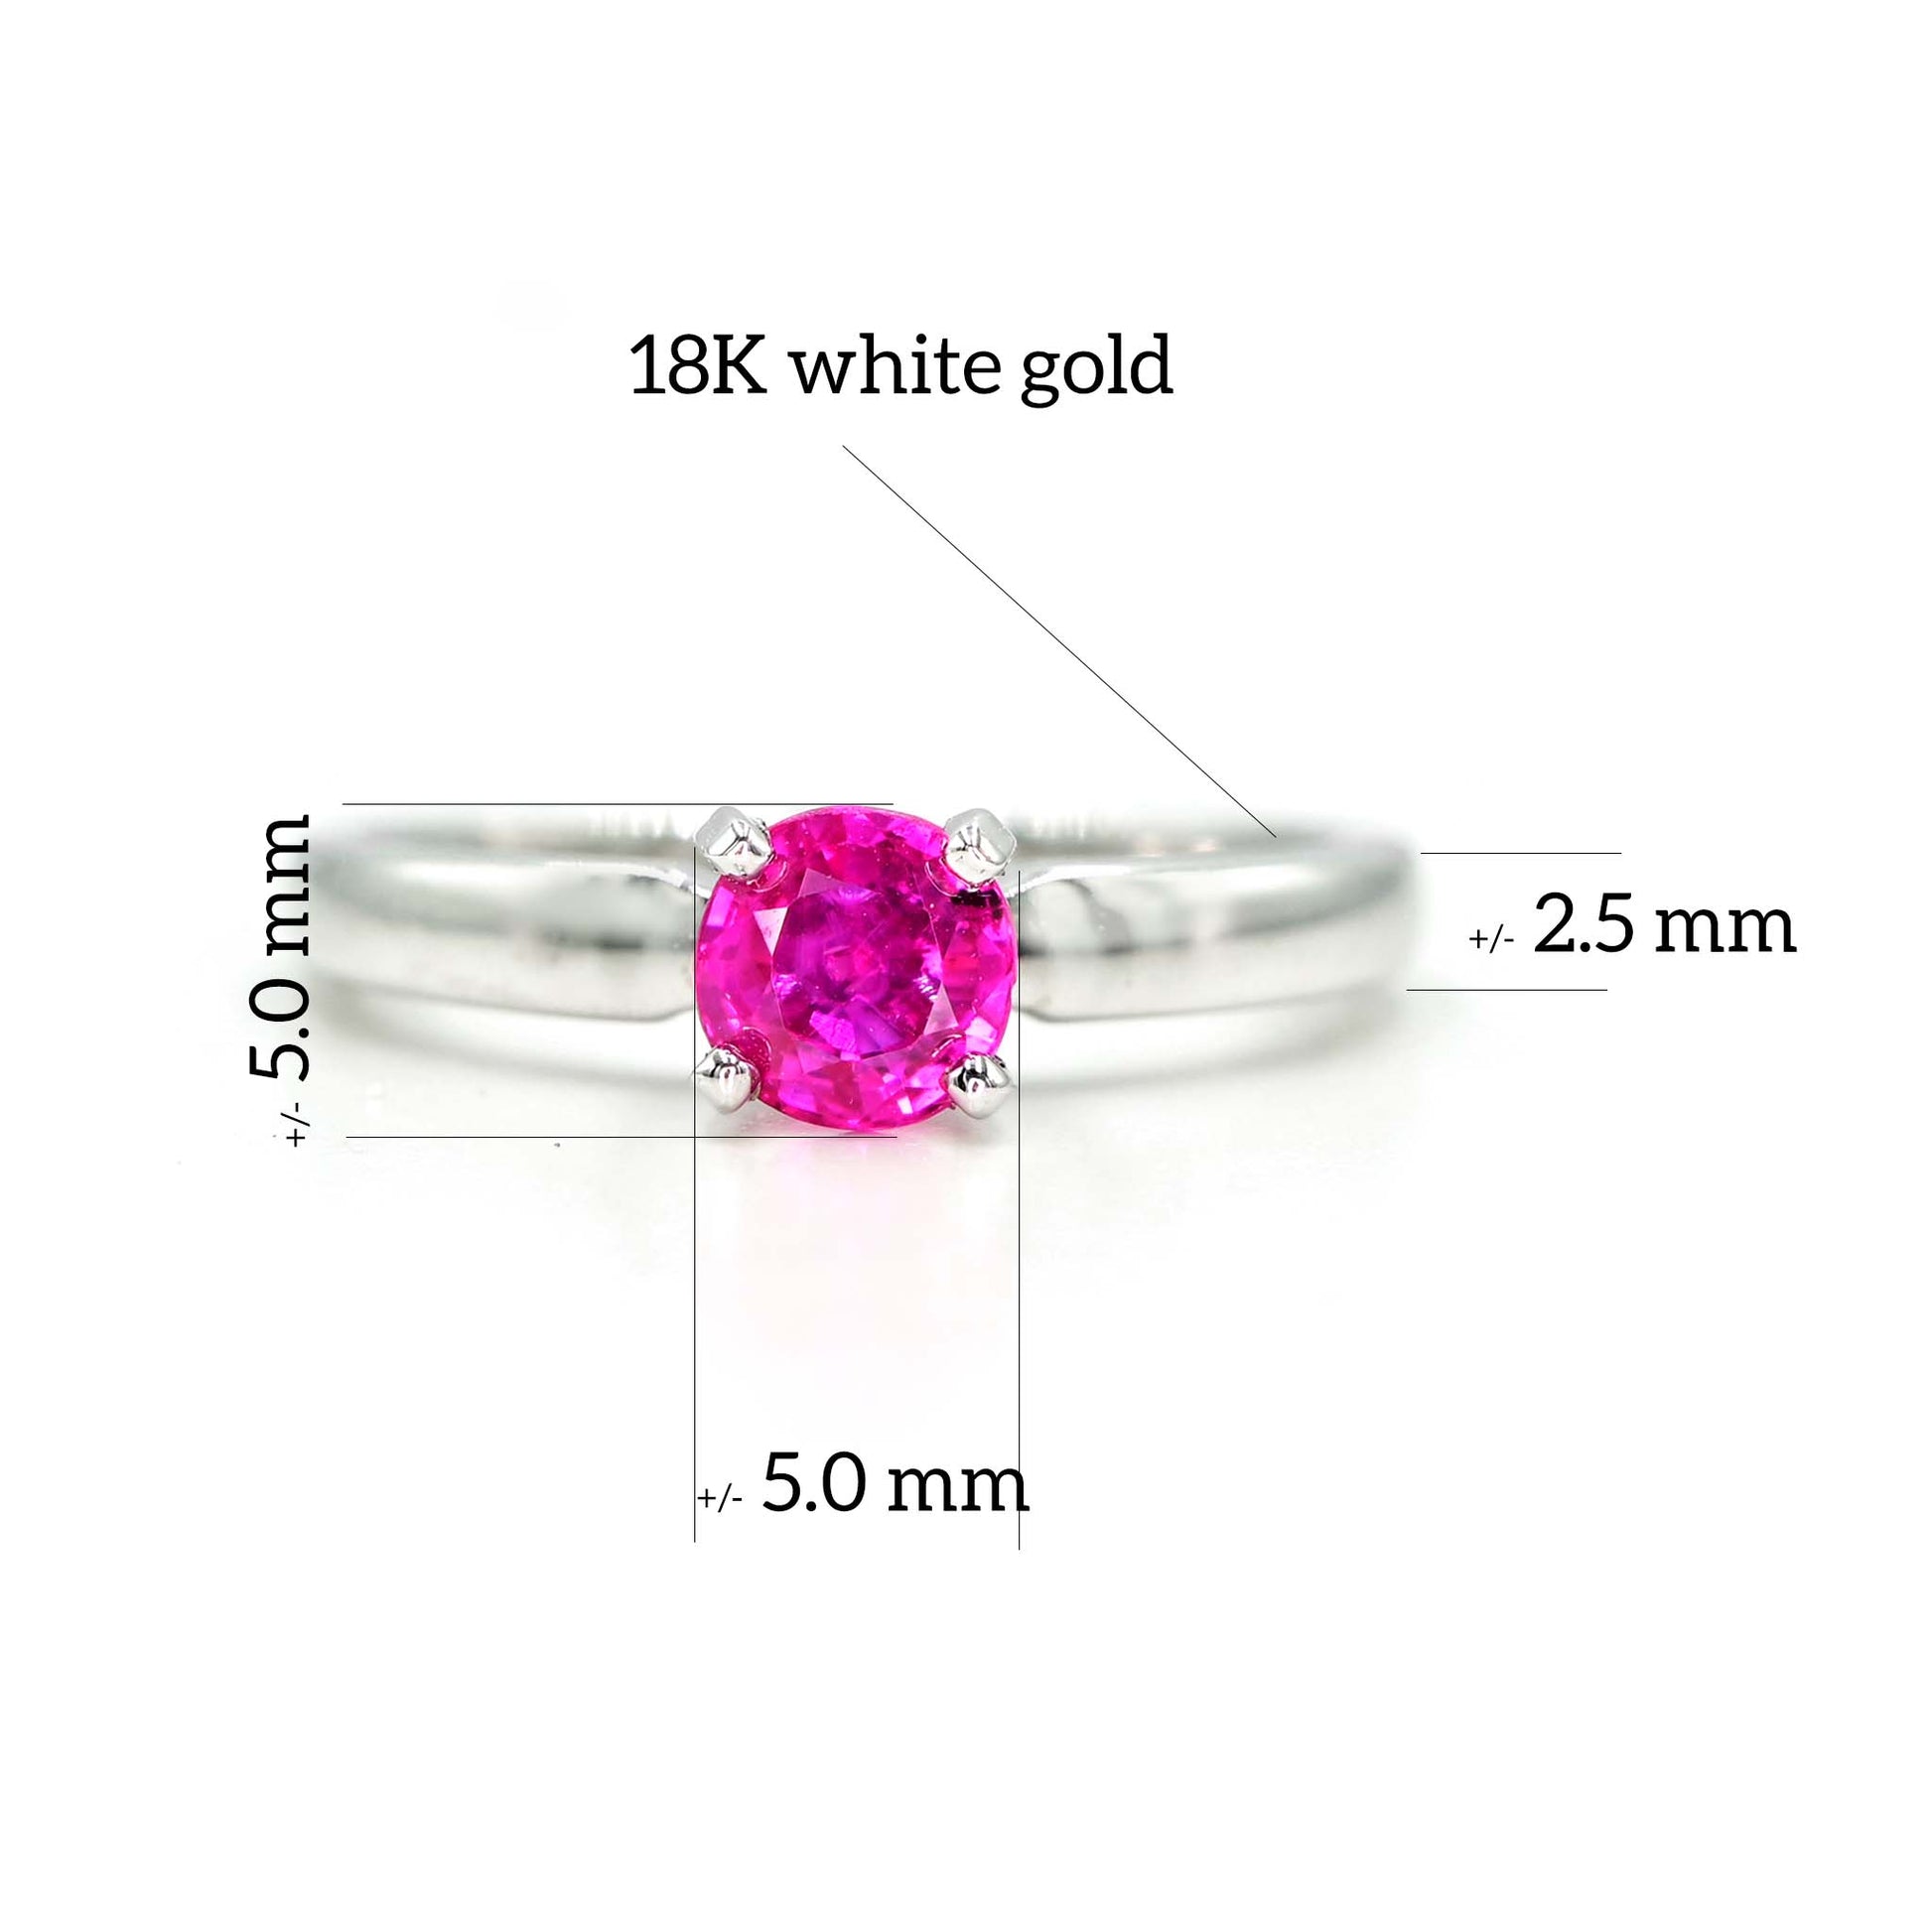 Details and dimensions of the Brilliant Ruby ring. Made to order, made by hand in Chiang Mai